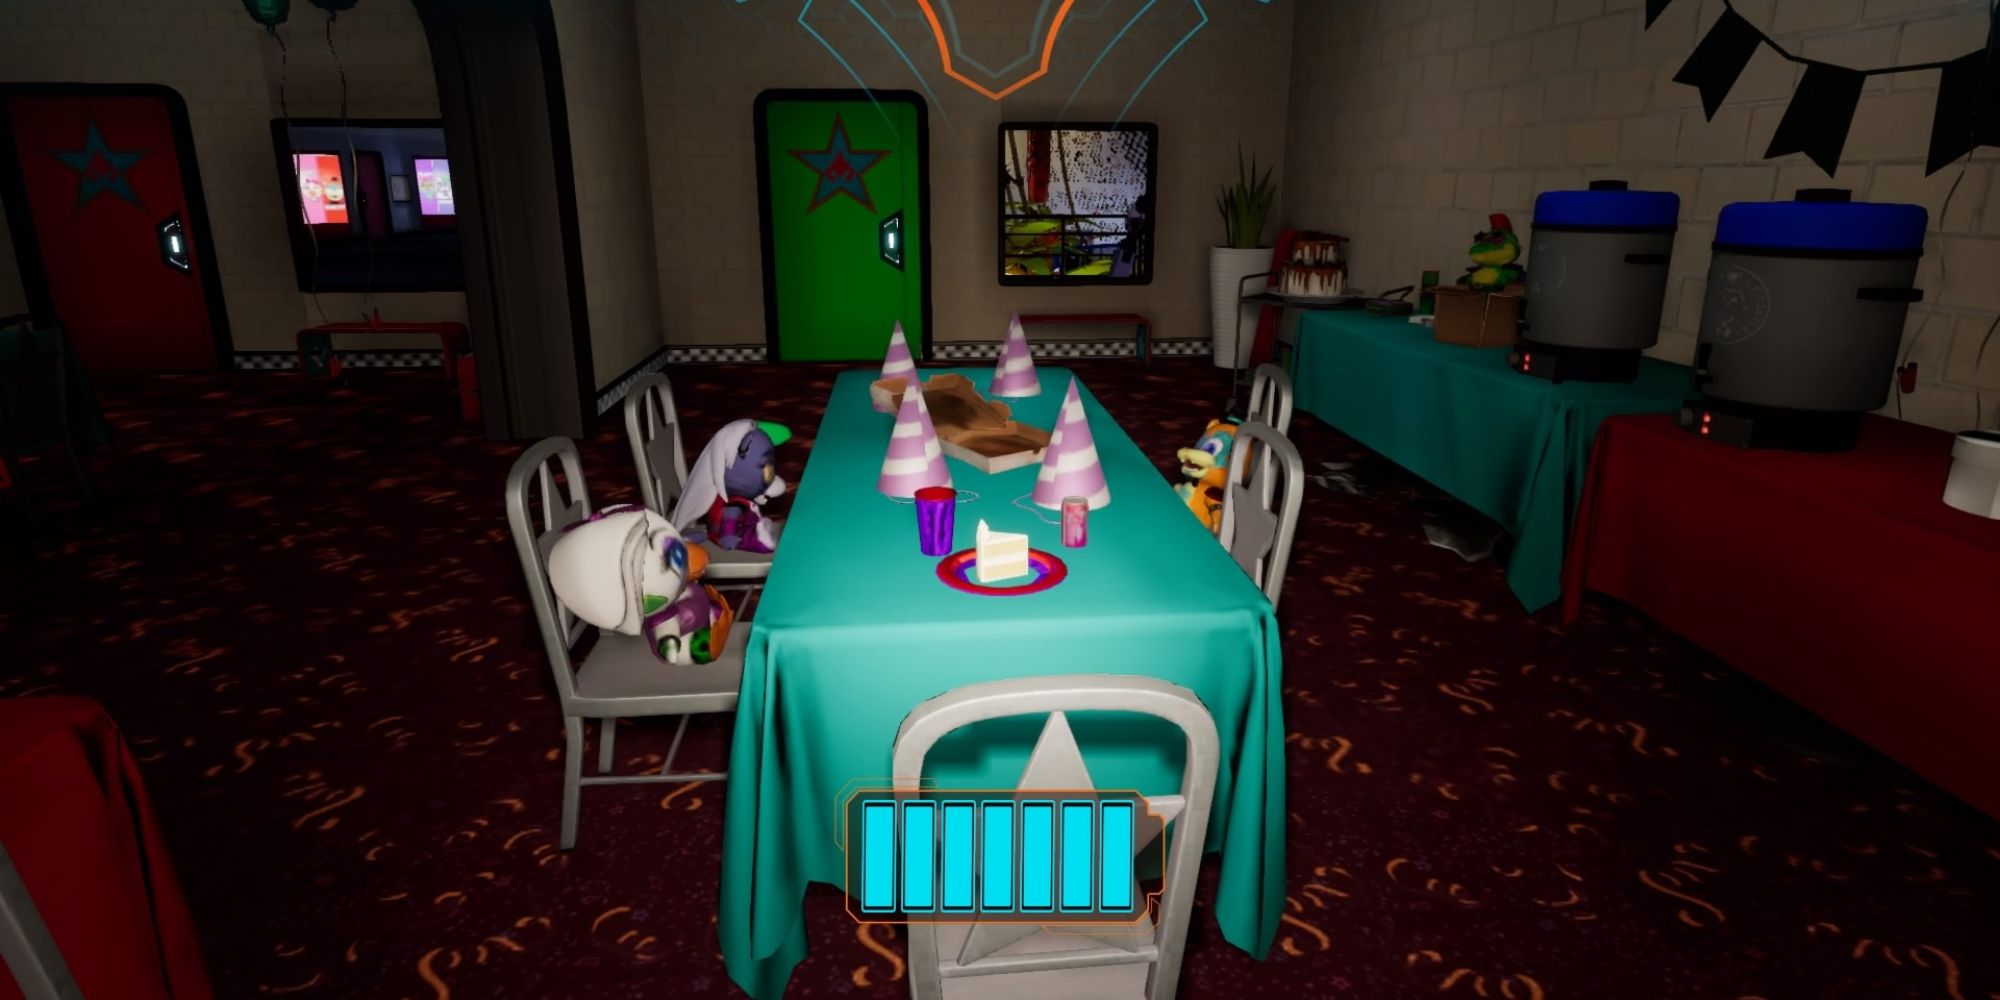 One of the party rooms near the daycare, where several plushes sit at chairs at a party prepped table